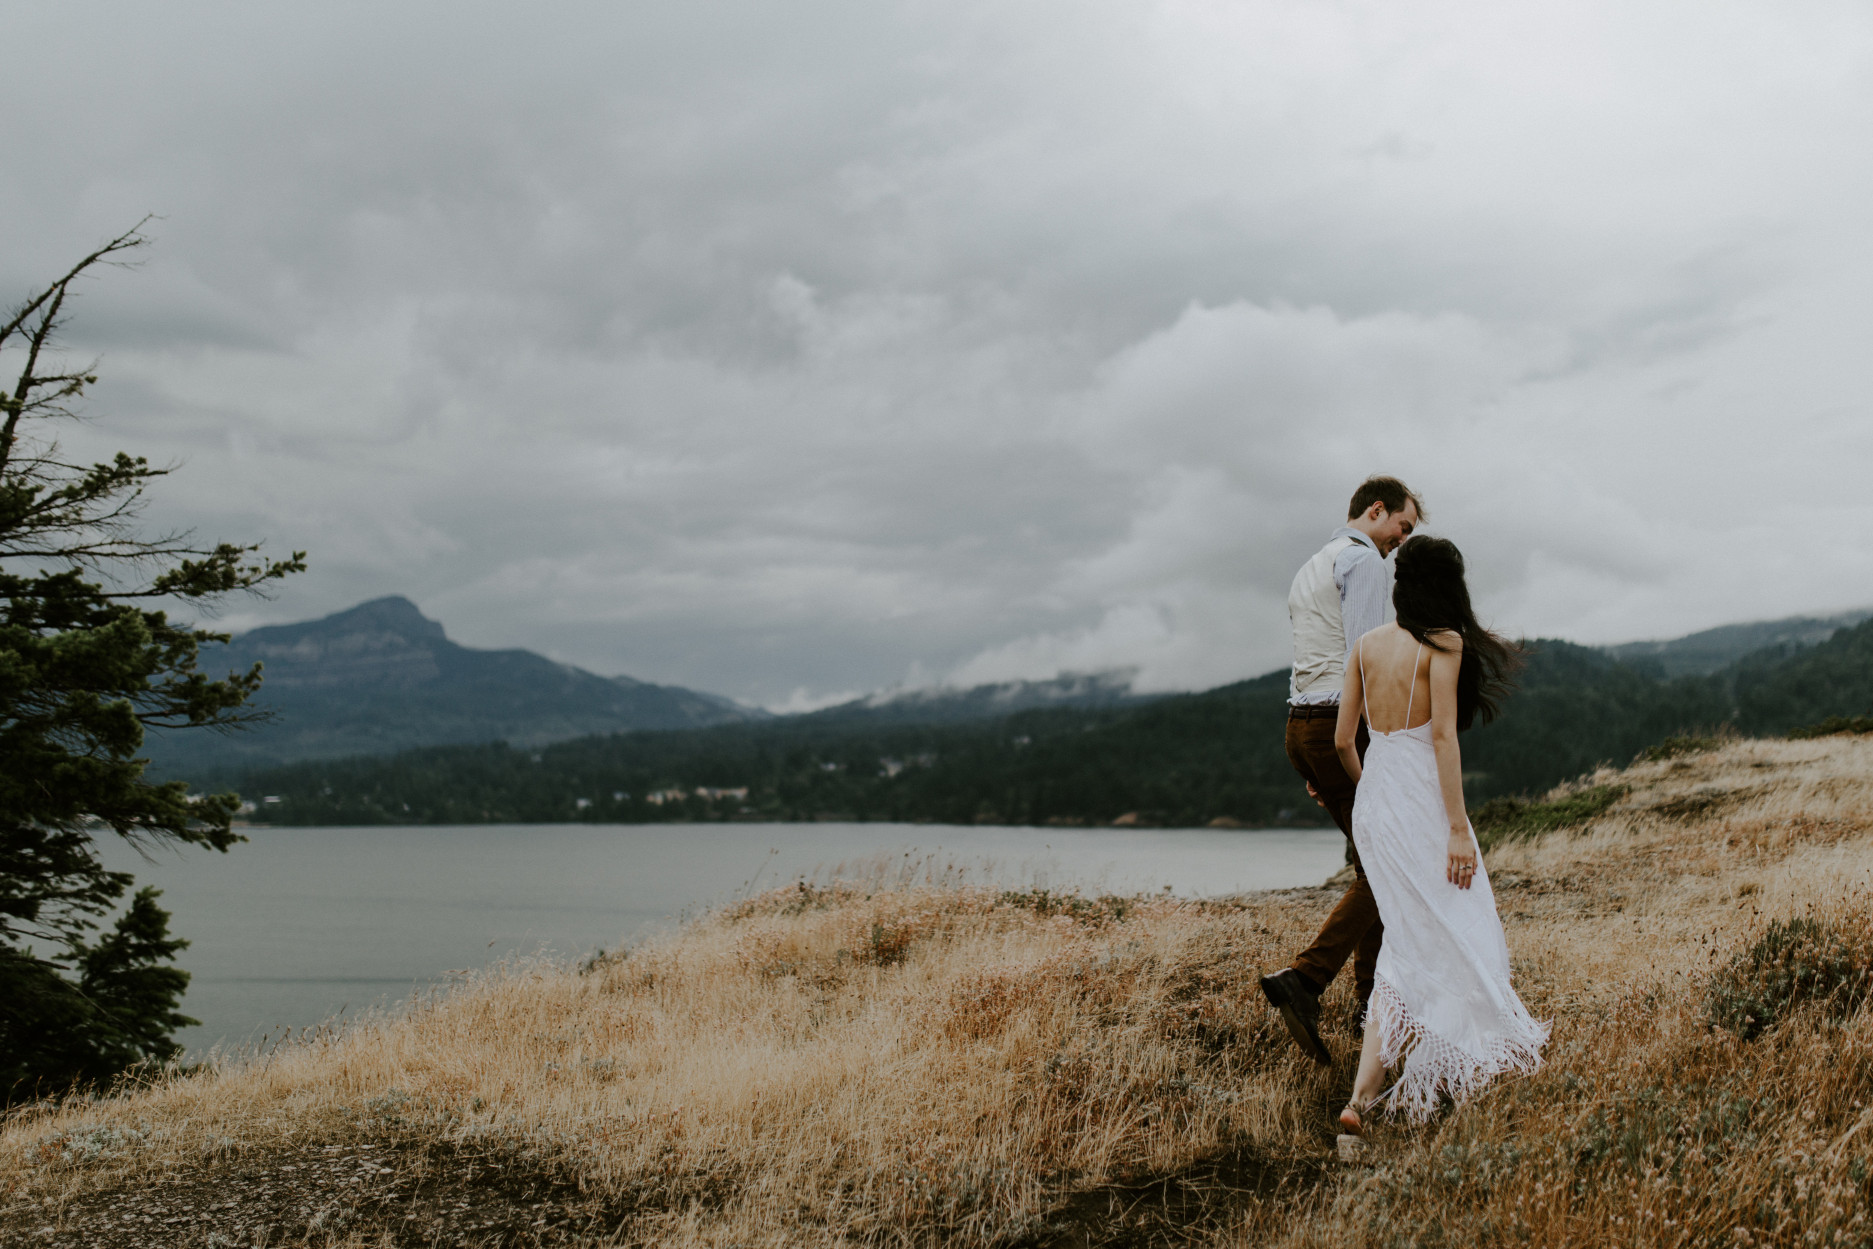 Jacob and Kimberlie walk with a view of a storm in the background. Elopement wedding photography at Cascade Locks by Sienna Plus Josh.